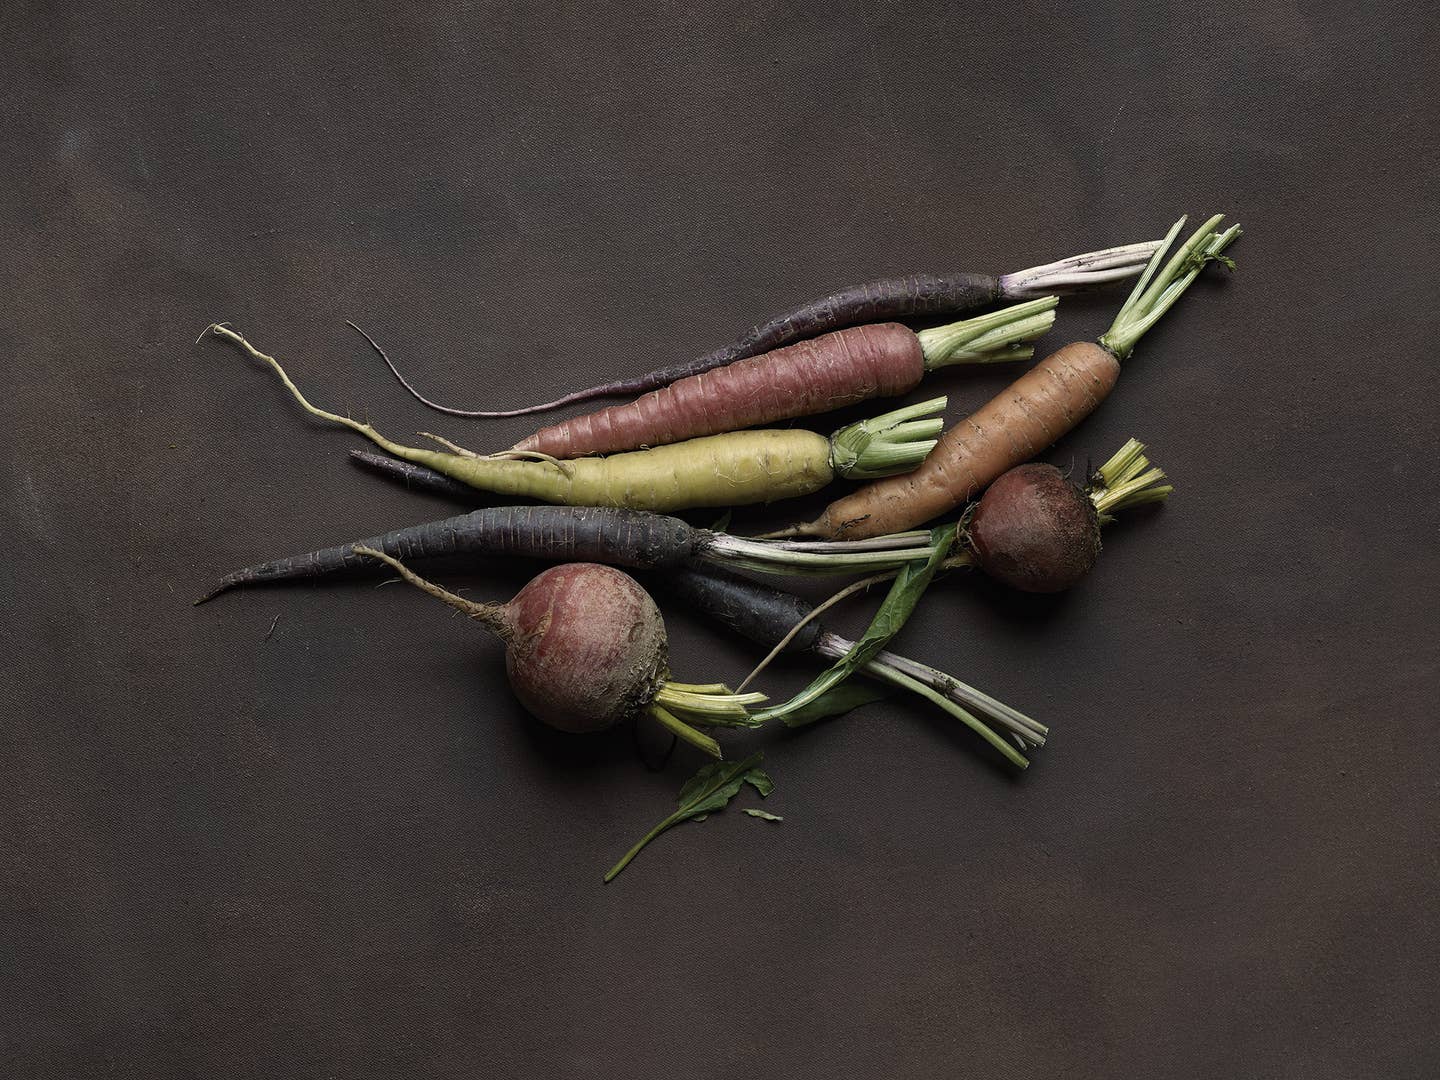 Are Root Vegetables the Root of Civilization?